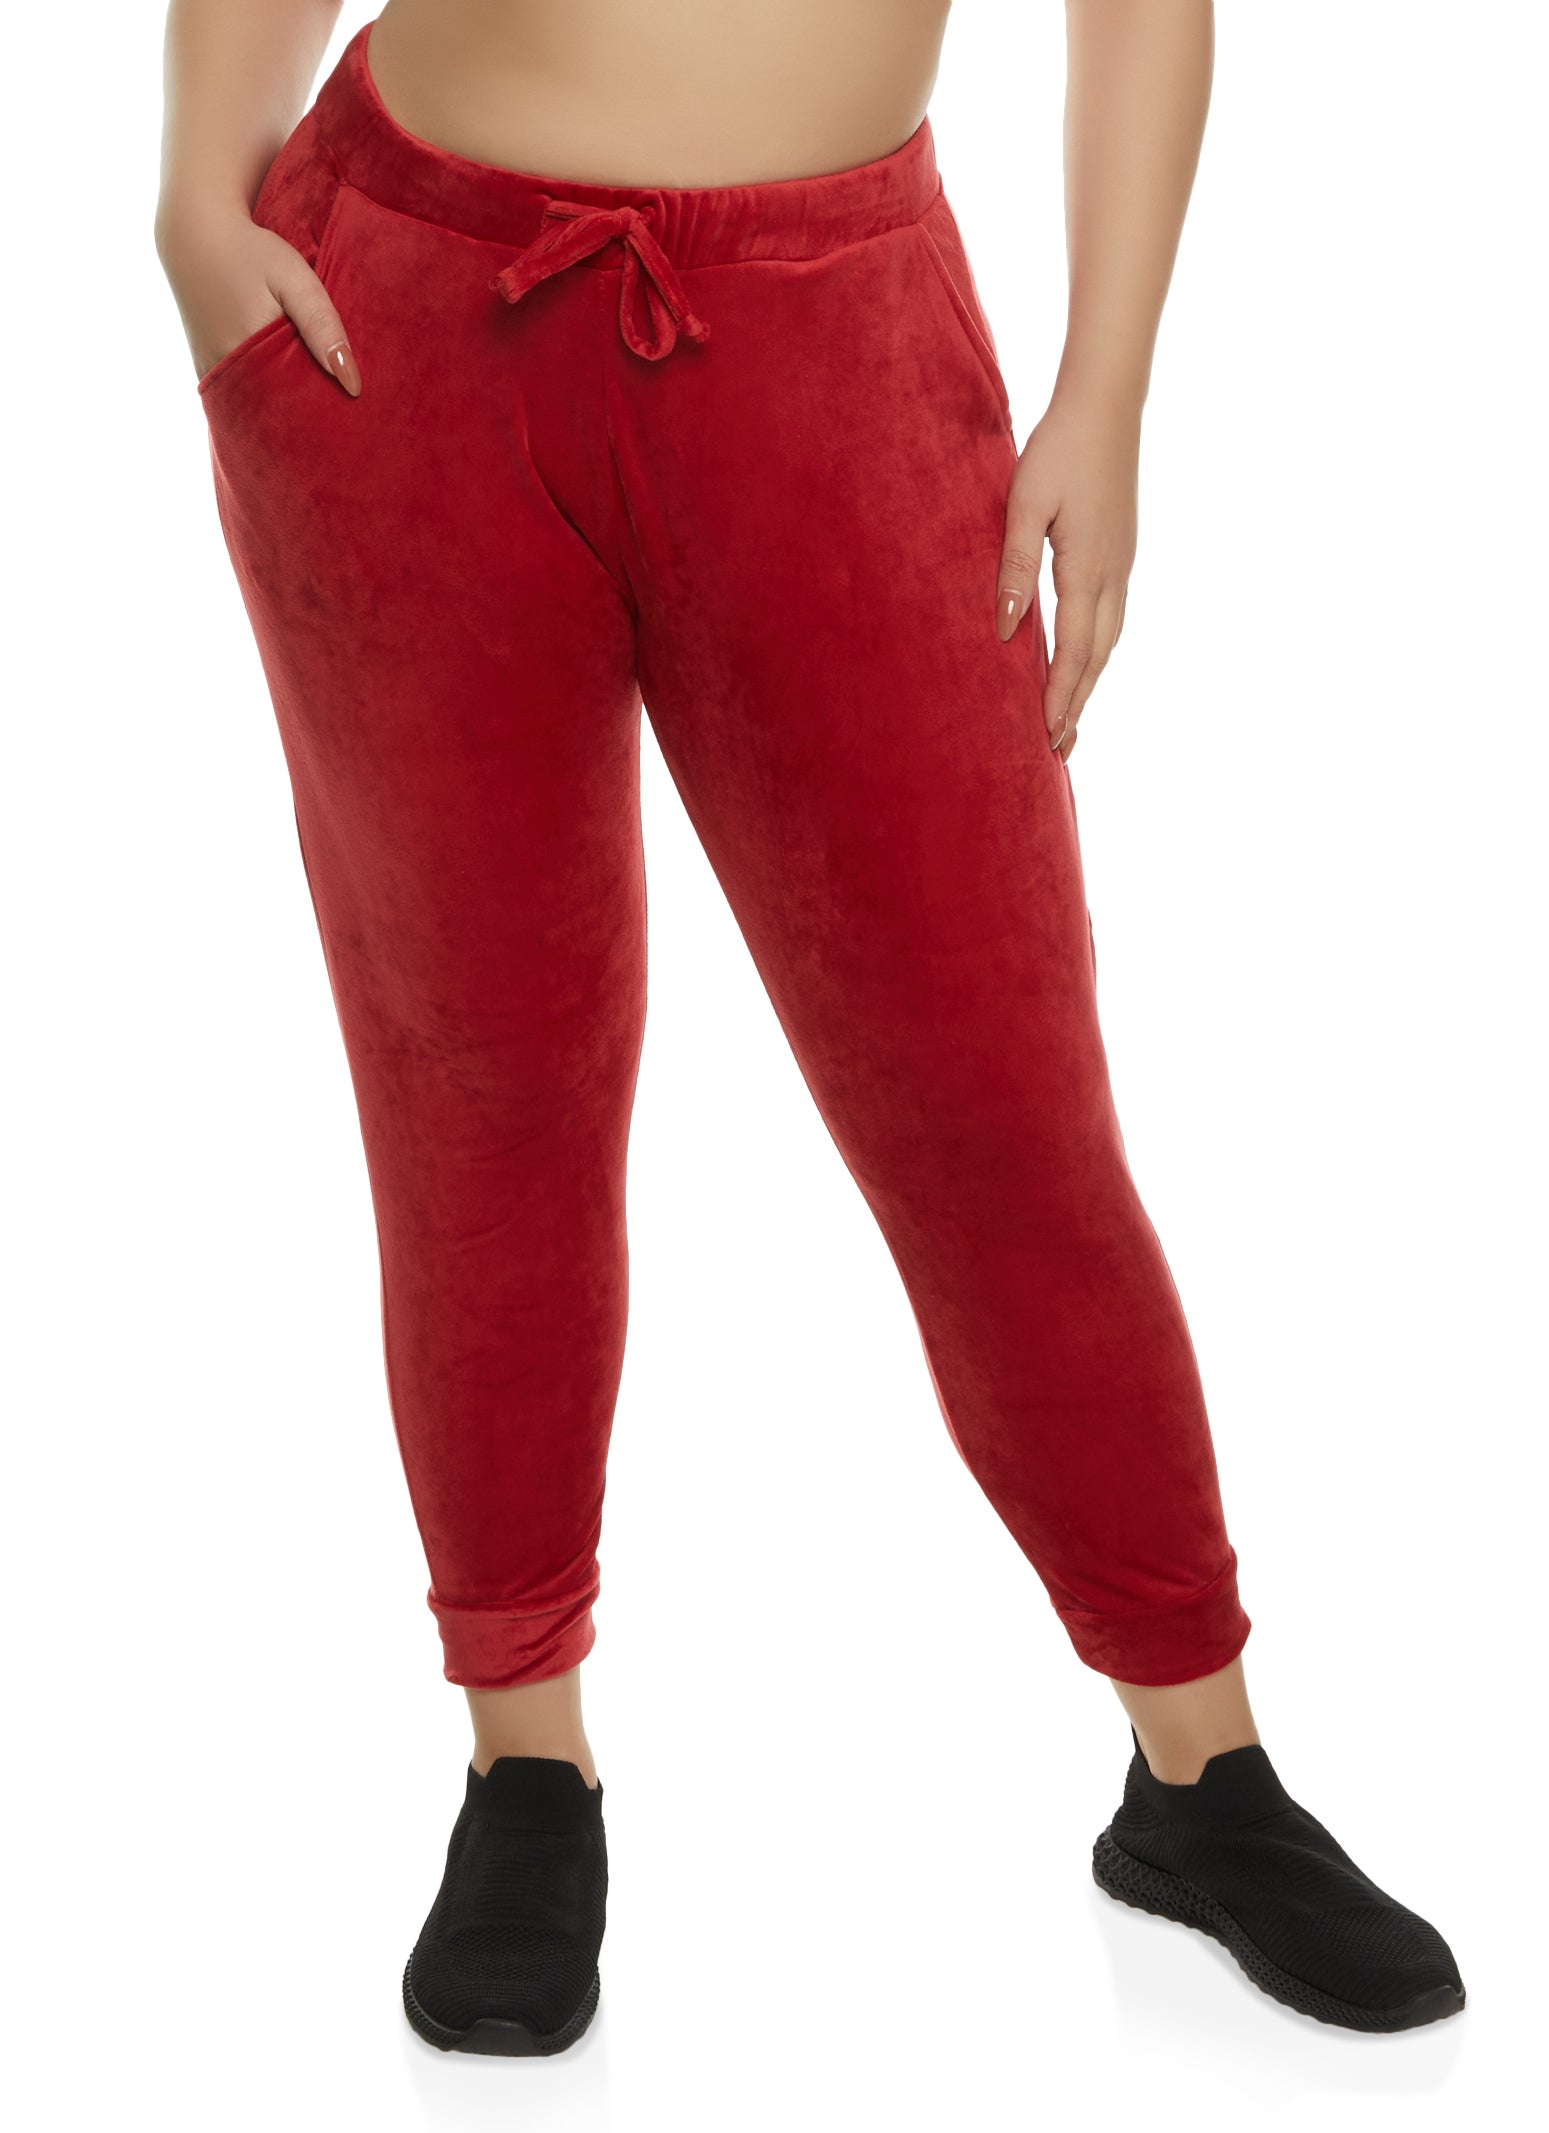 Filles A Papa Ladies Red Fleece Oversized Tracksuit Pants, Brand Size 3 ( Large) 16BIS - CHELSEA-S-RED 2002017031792 - Apparel - Jomashop